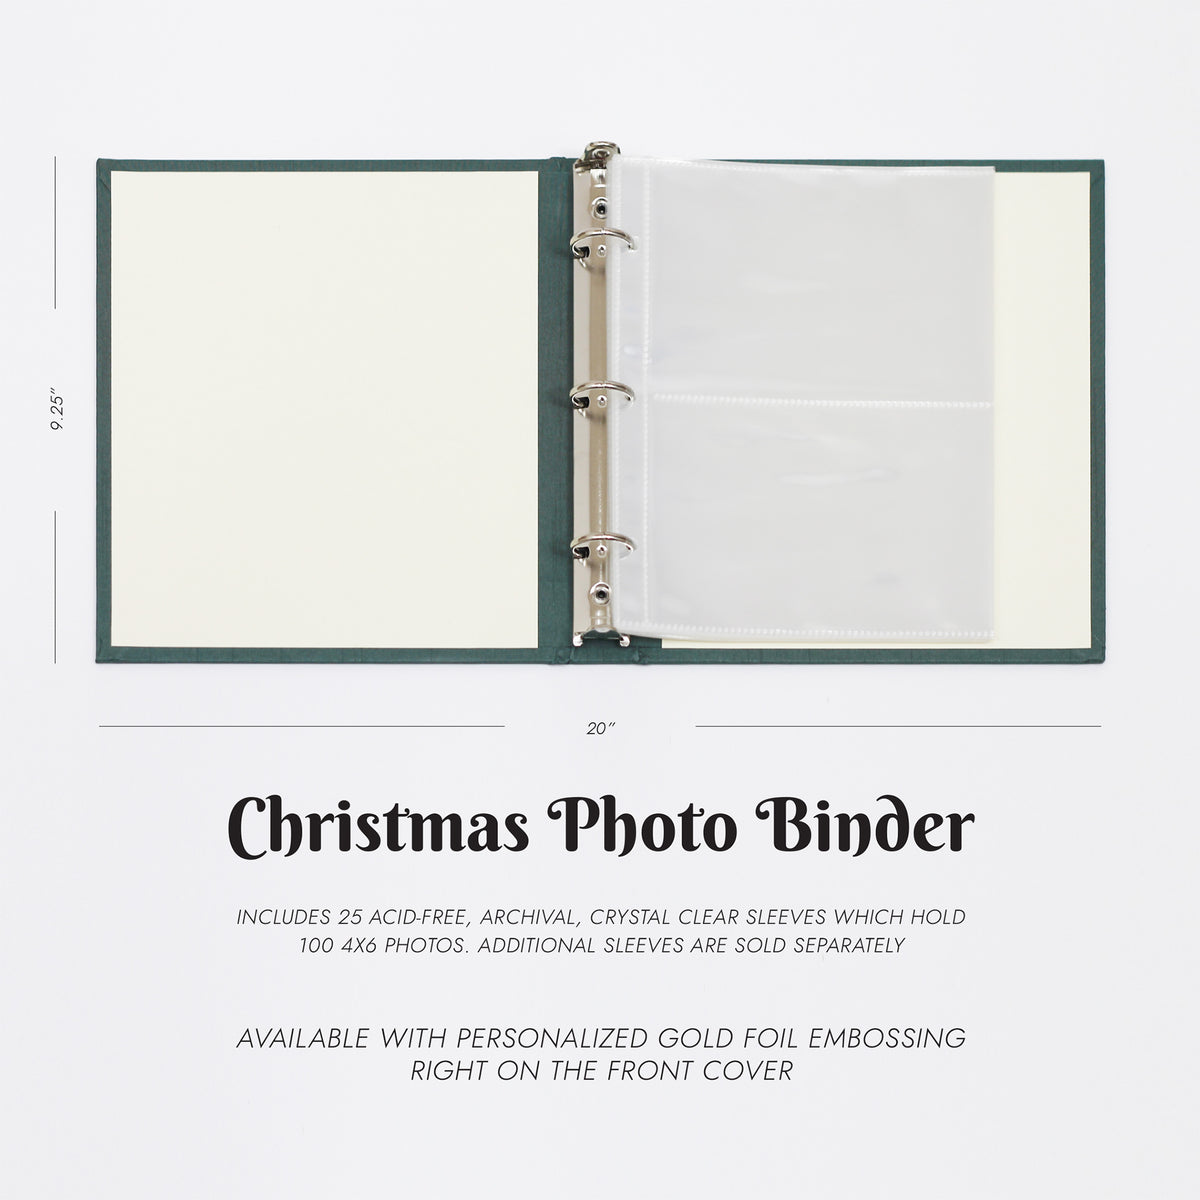 Medium Christmas Photo Binder with Red Vegan Leather Cover for 4x6 Photos